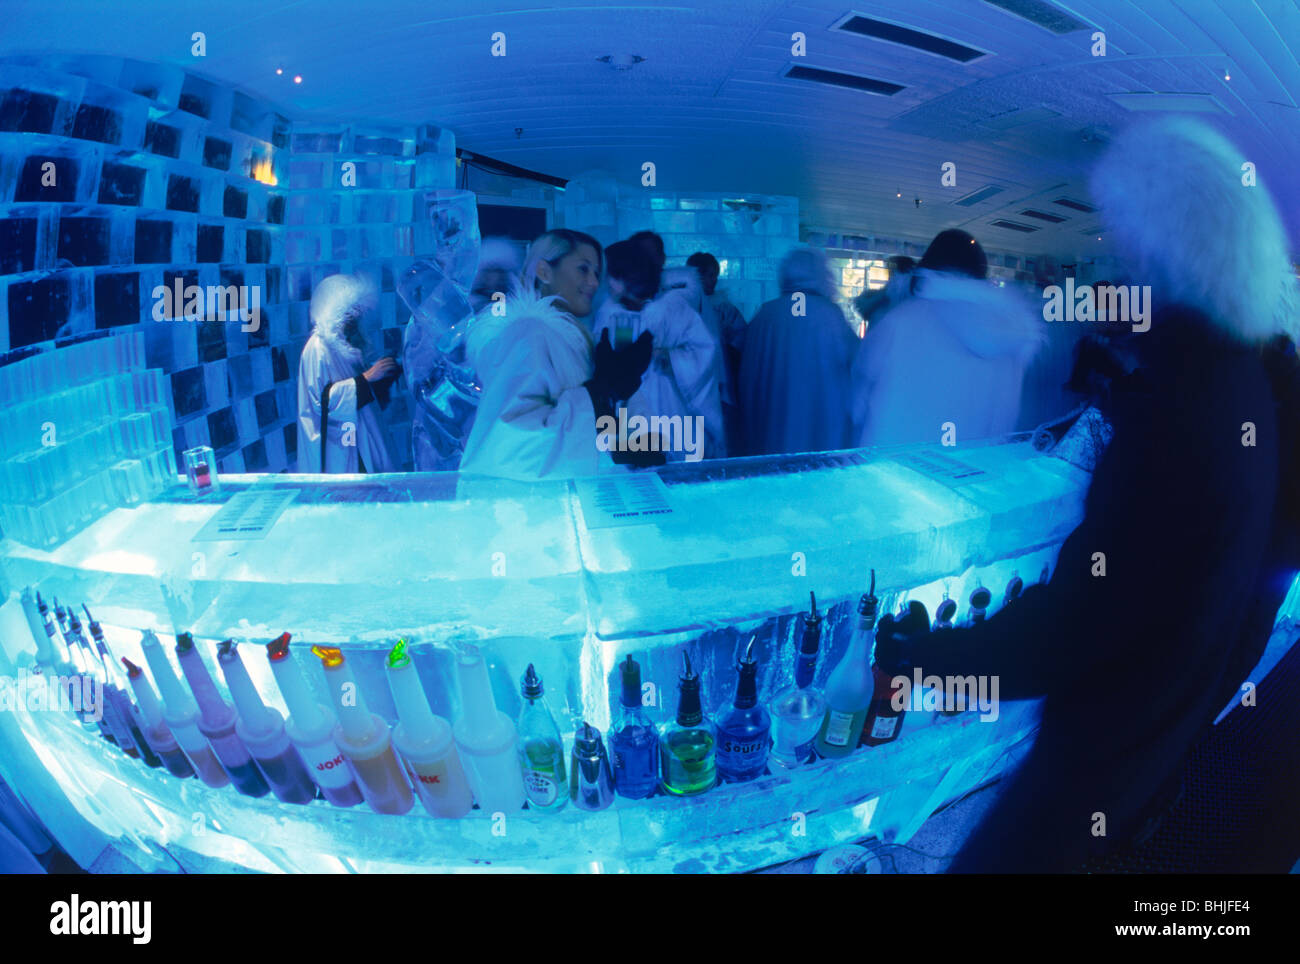 Ice Bar Stockholm Stock Photos & Ice Bar Stockholm Stock Images ...